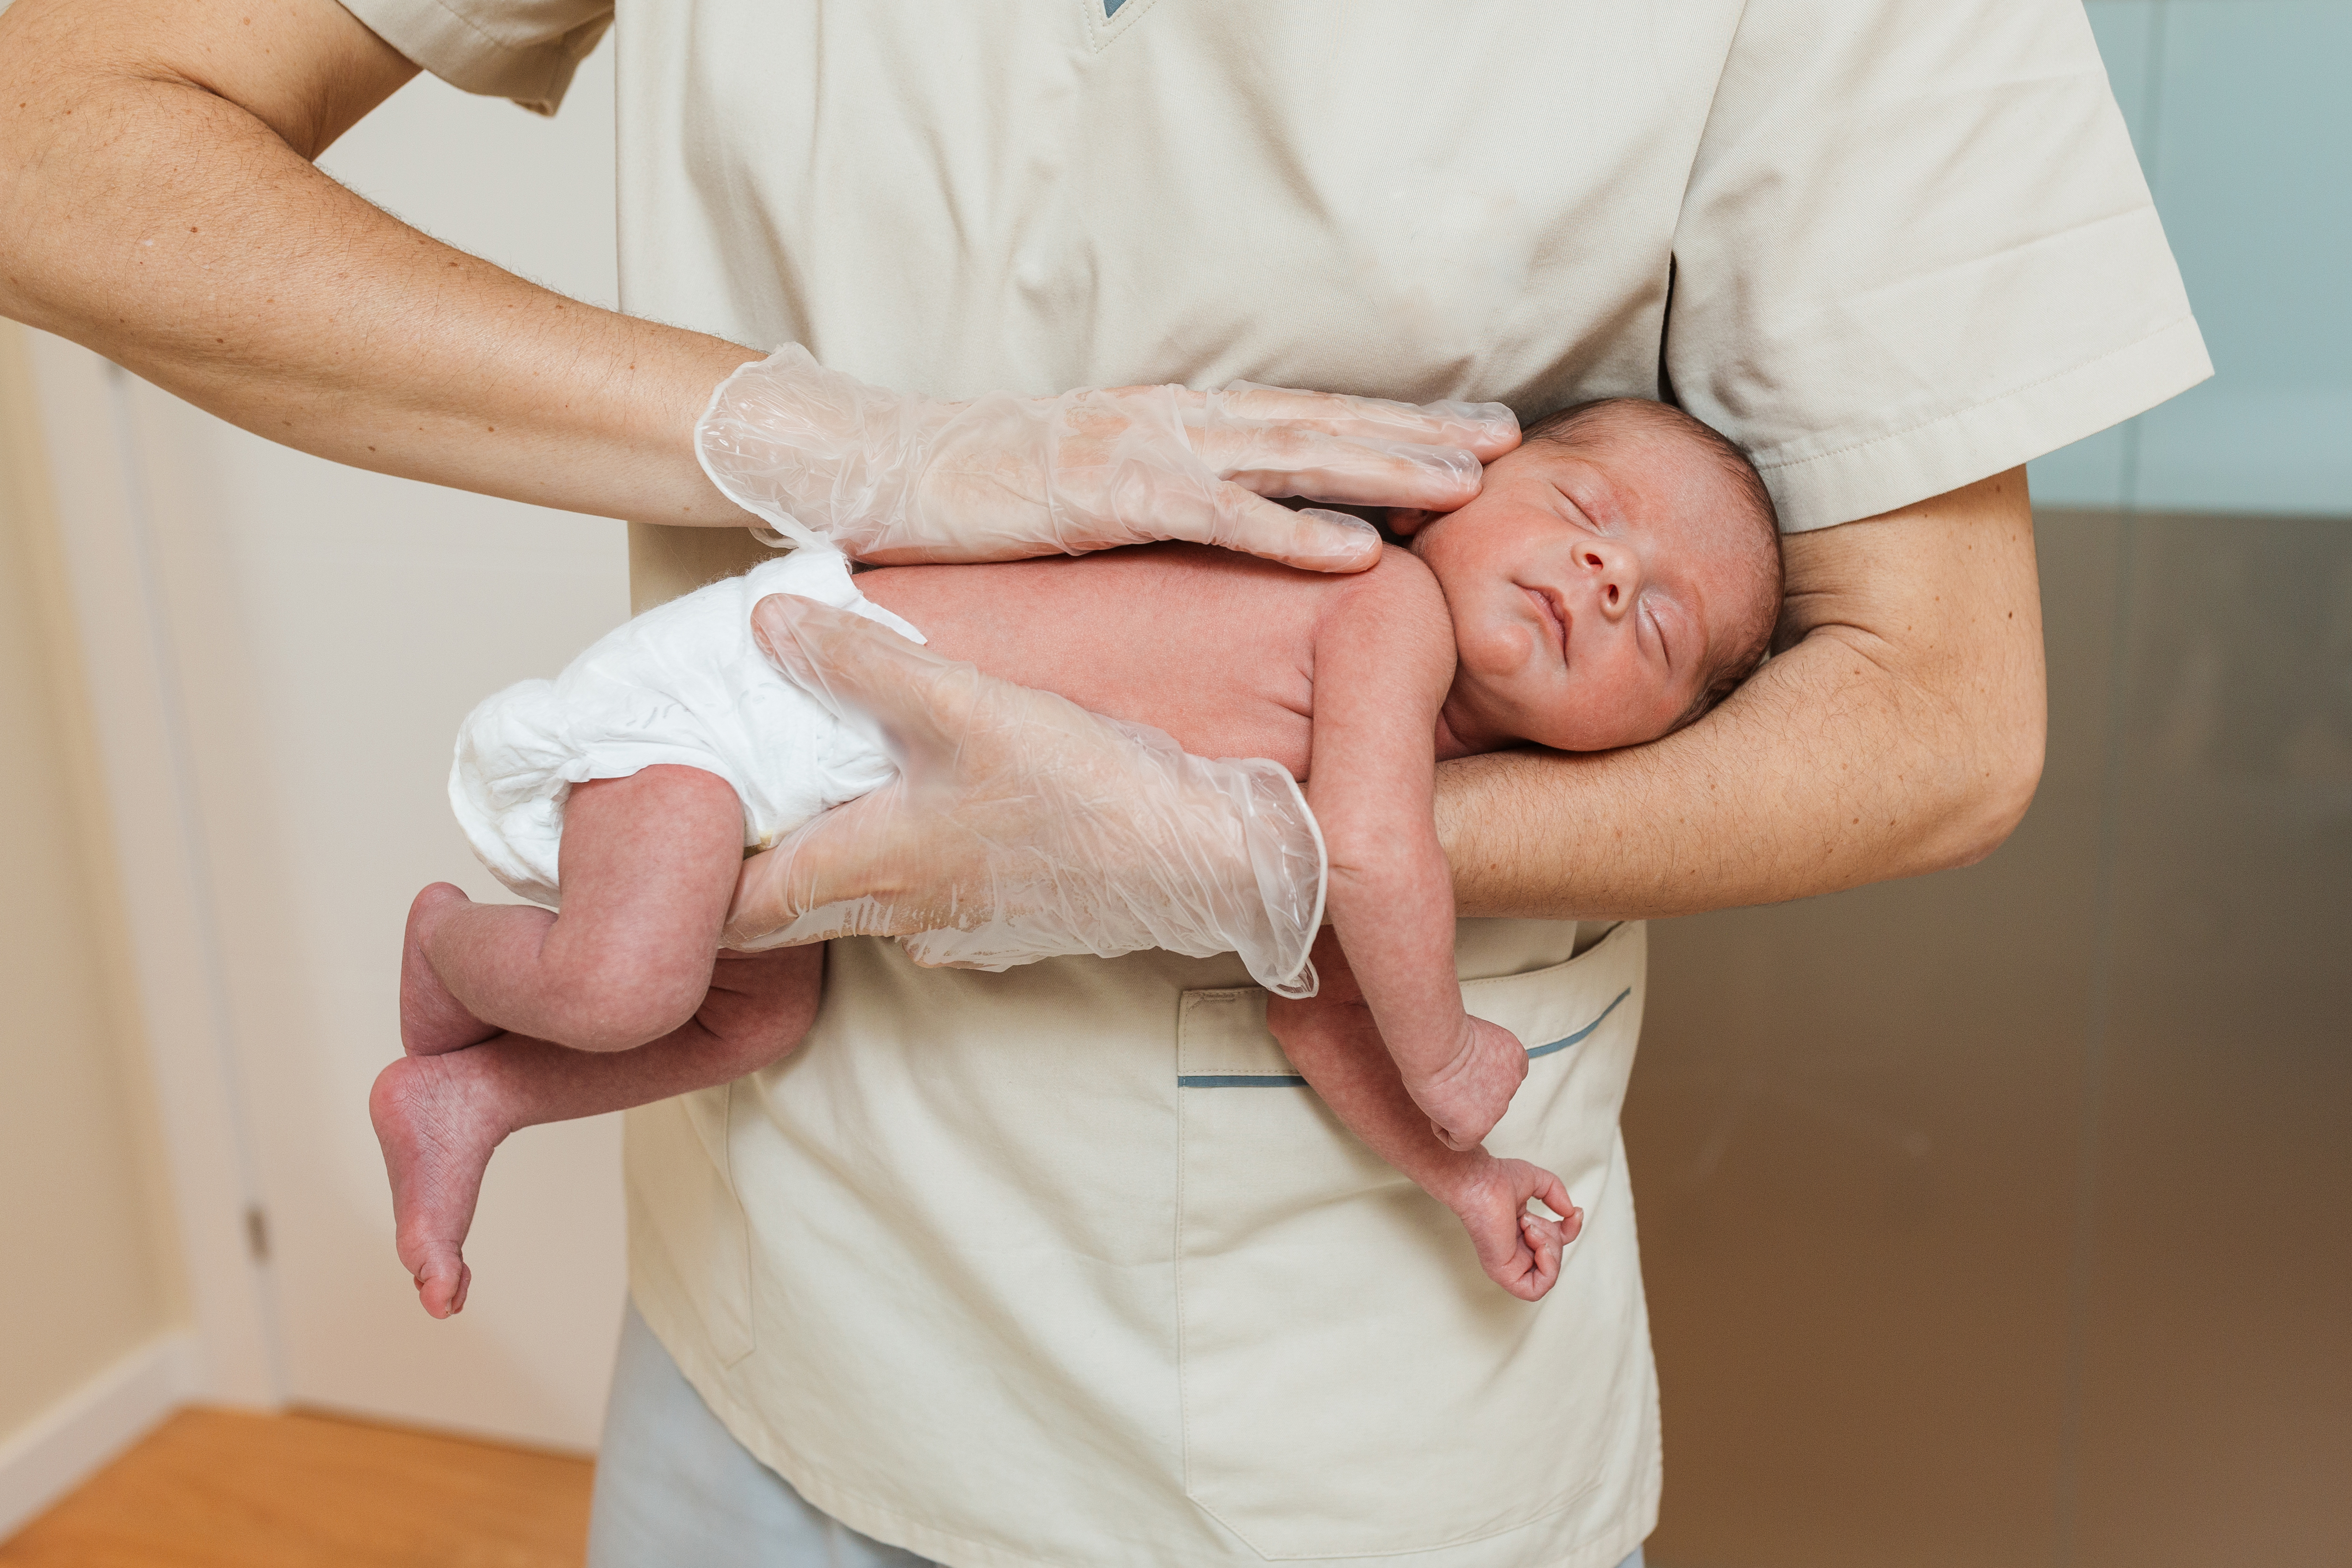 Close up view of a medical doctor examining a newborn baby. Medical and health concept.